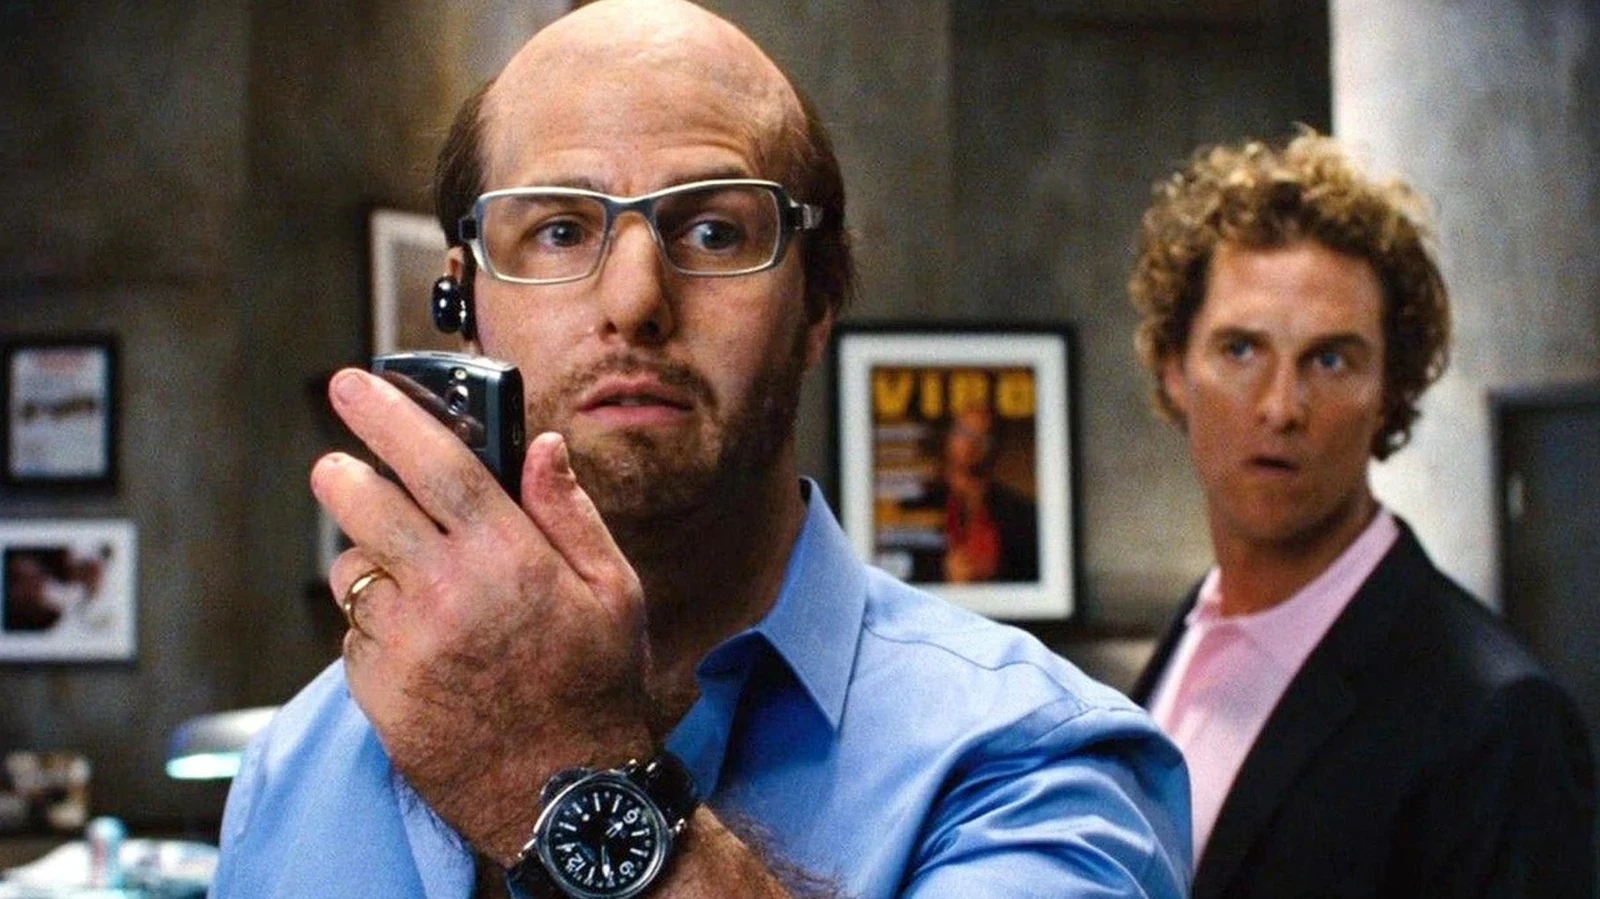 Tom Cruise and Matthew McConaughey in a still from Tropic Thunder